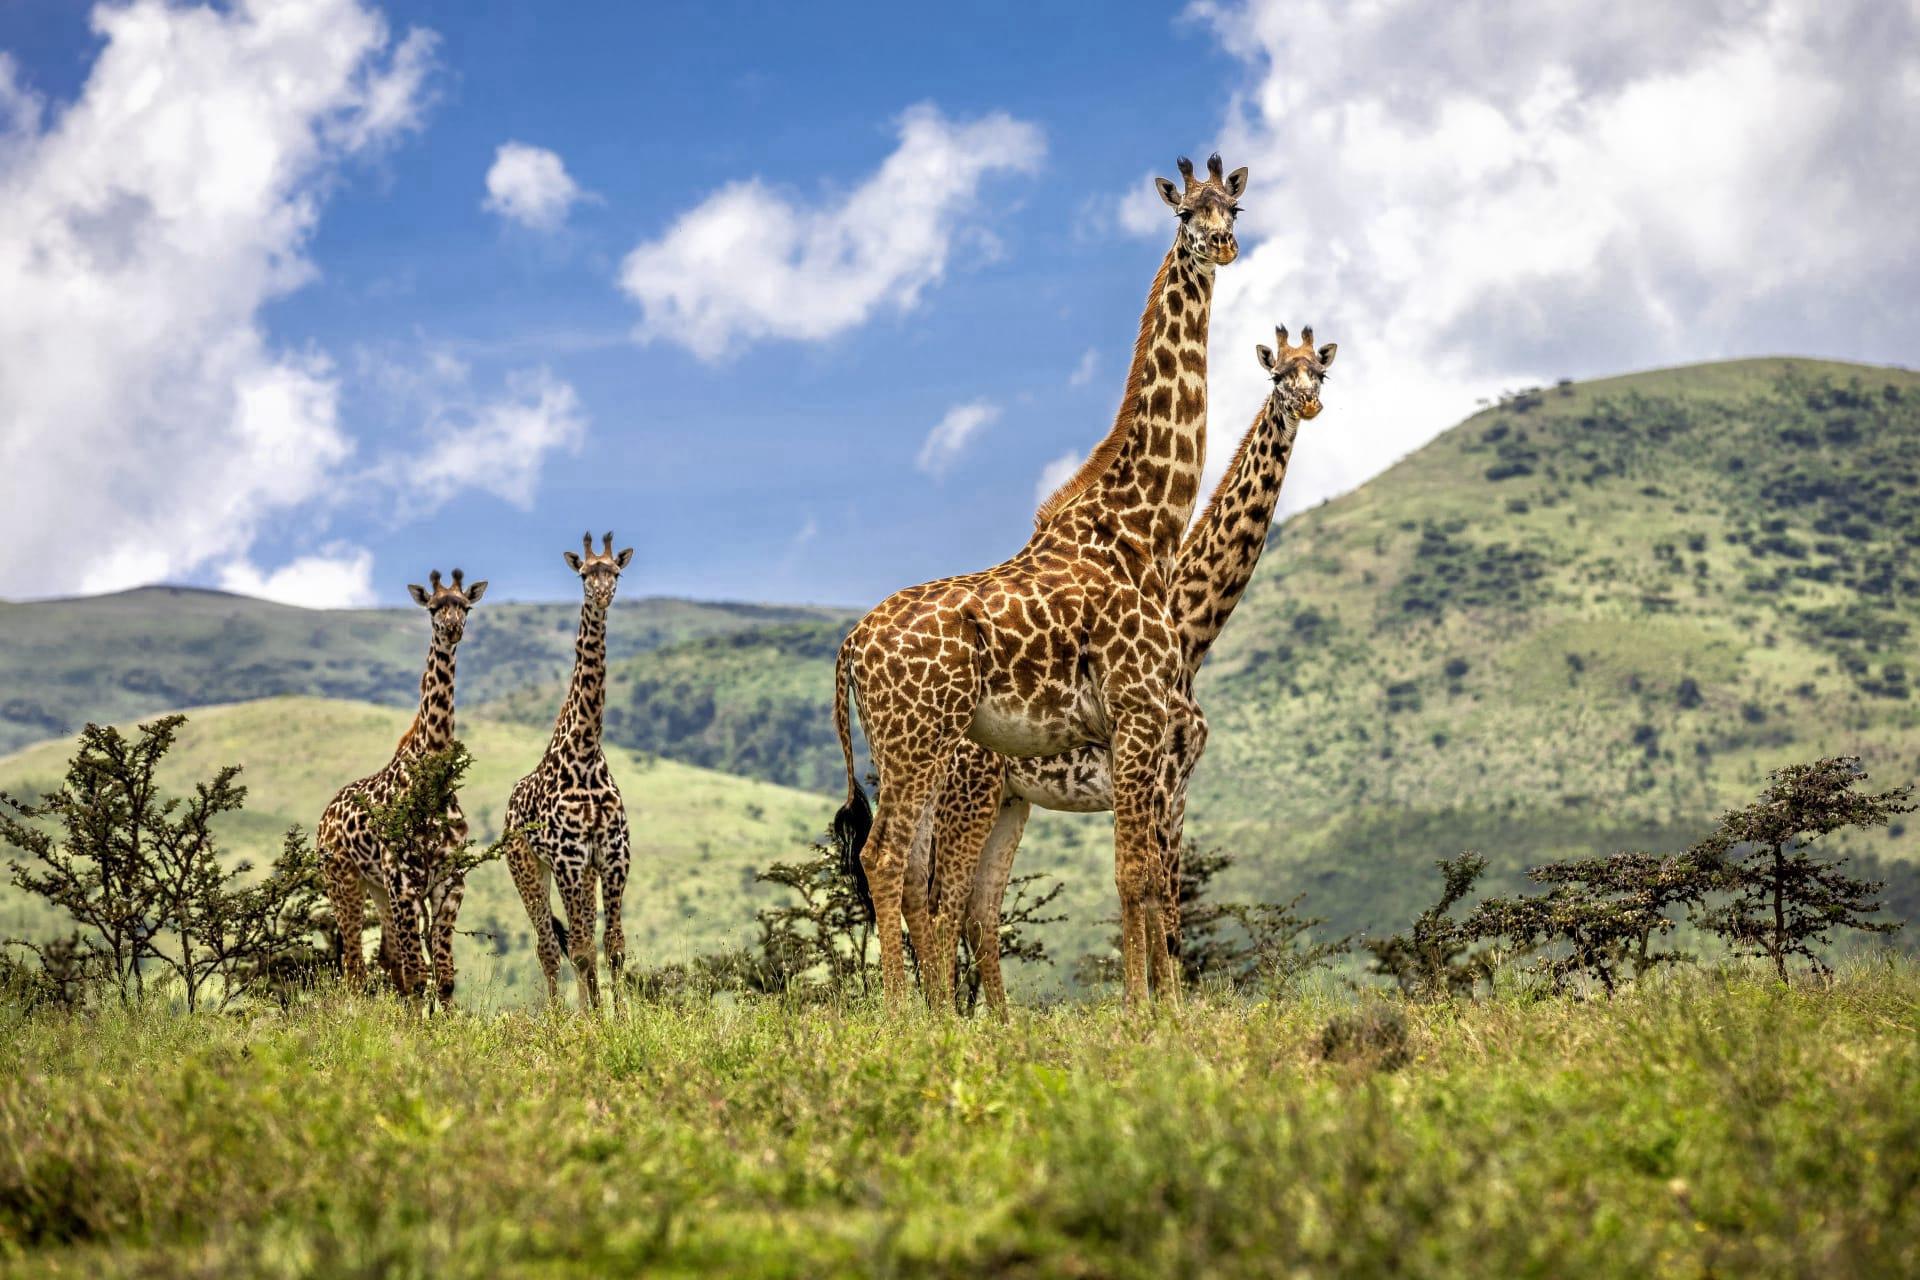 Giraffe pictures